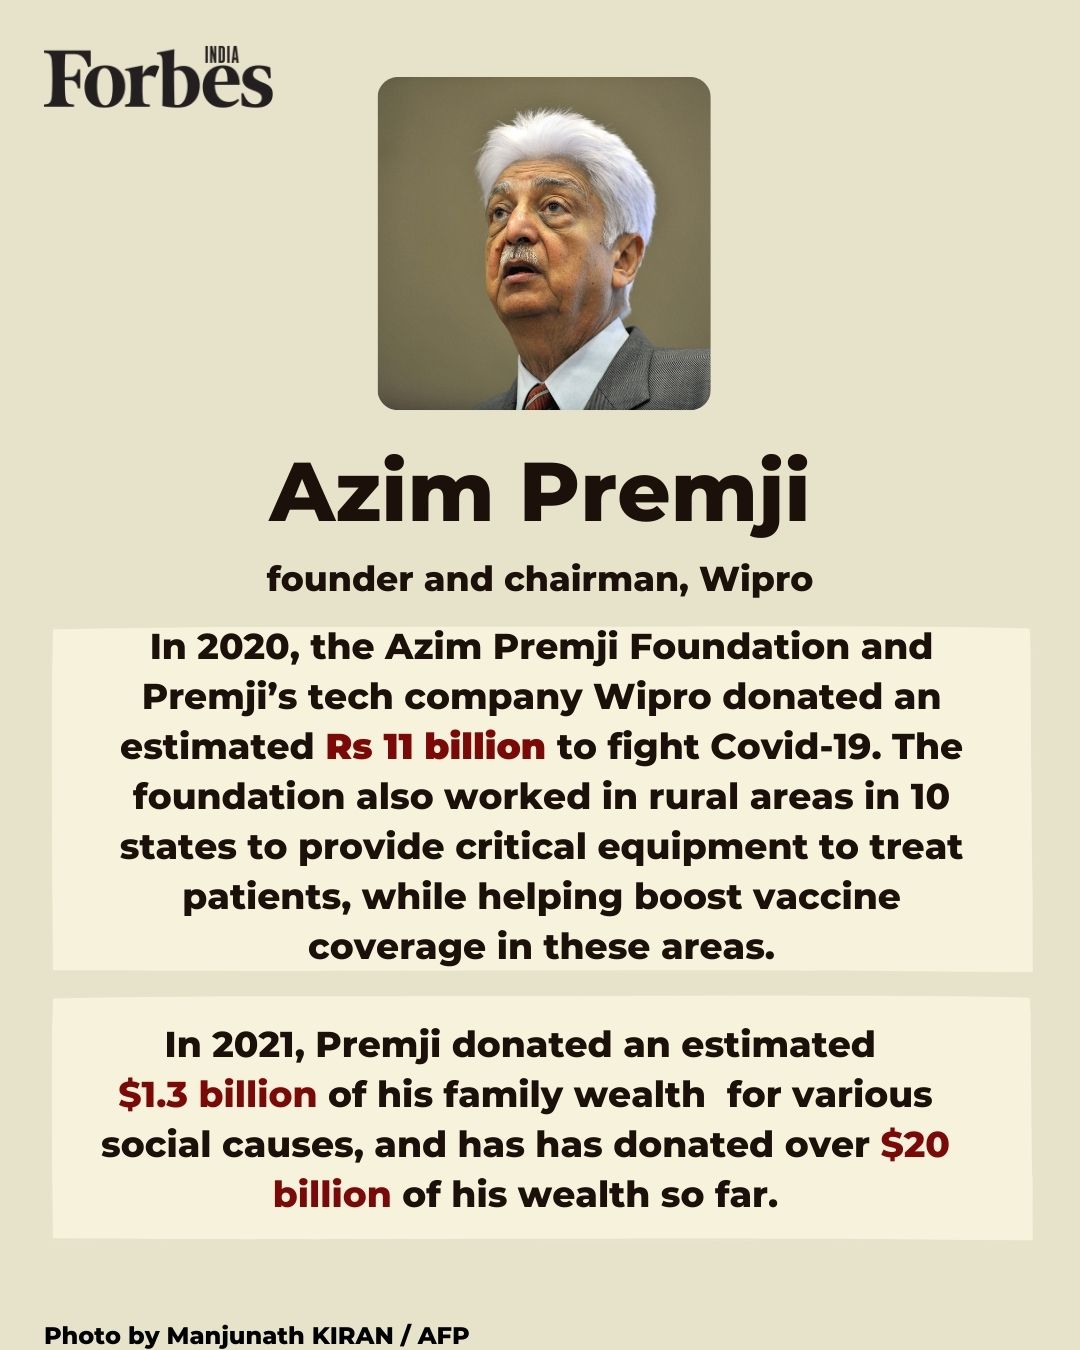 Vedanta's Anil Agarwal and Wipro's Azim Premji make it to 'Asia's 2021 Heroes of Philanthropy' list